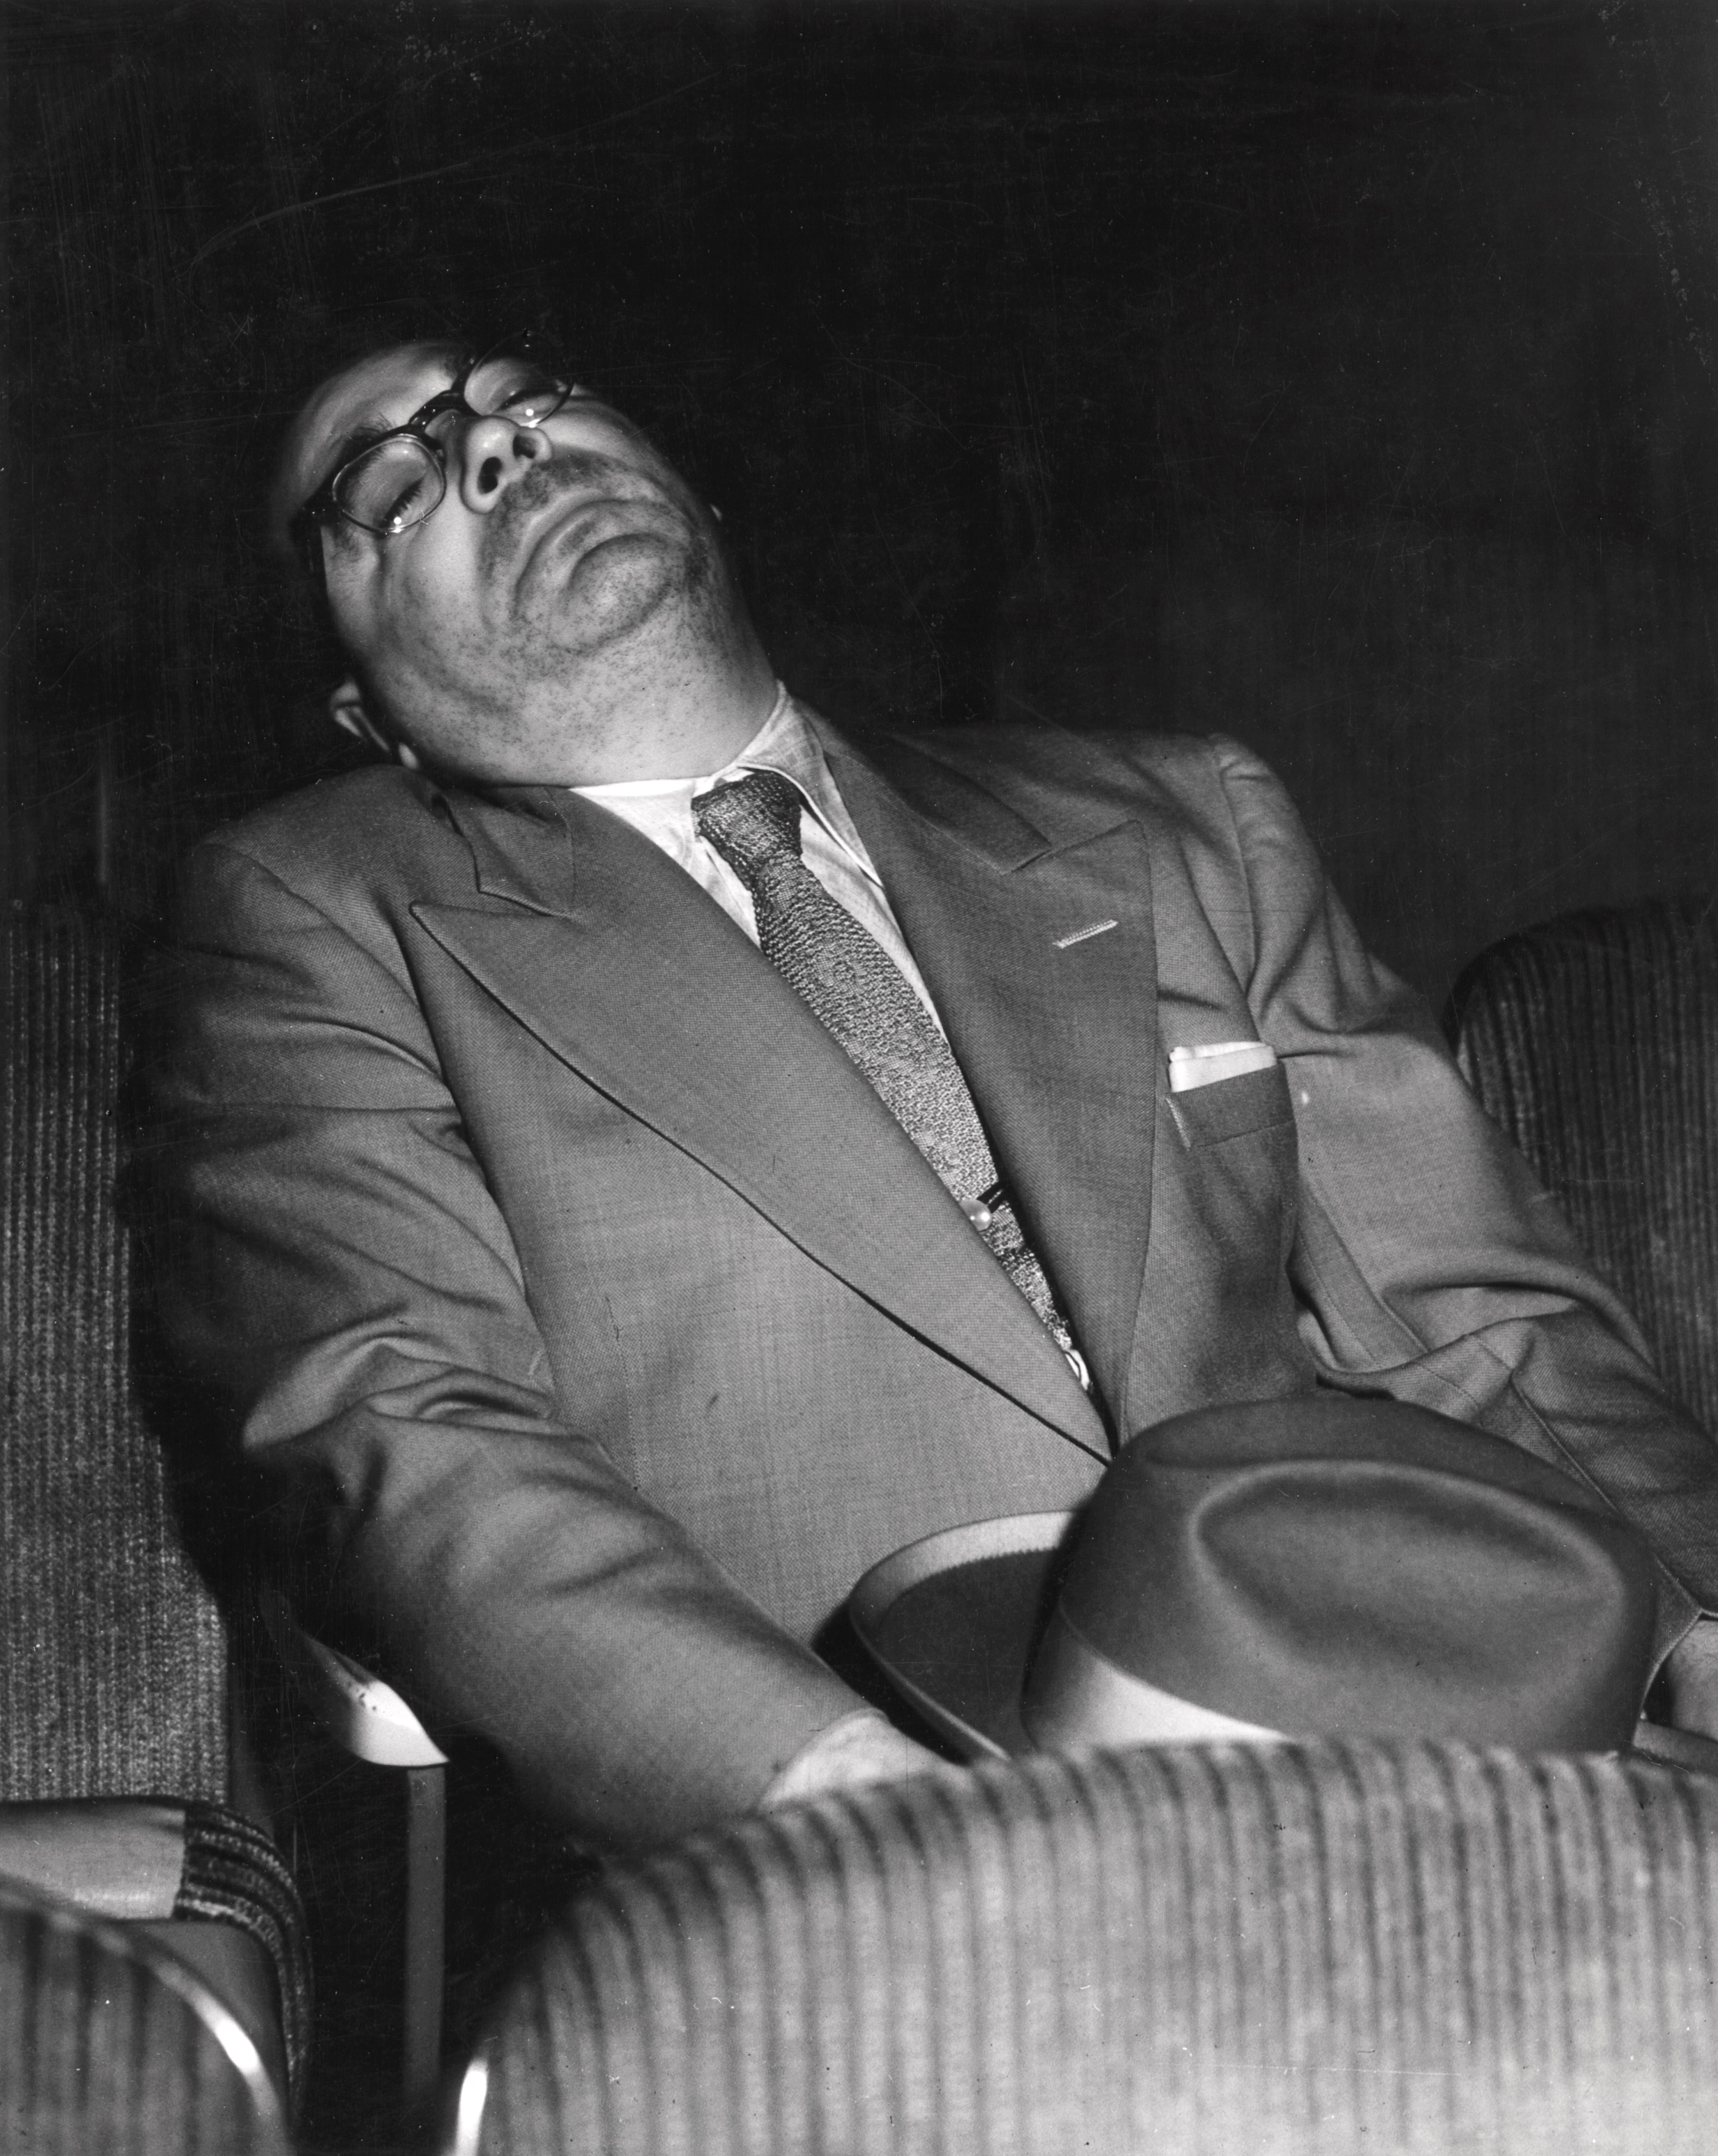 DOZING: Sleeping at the Movies, ca. 1943. © Weegee/ International Center of Photography